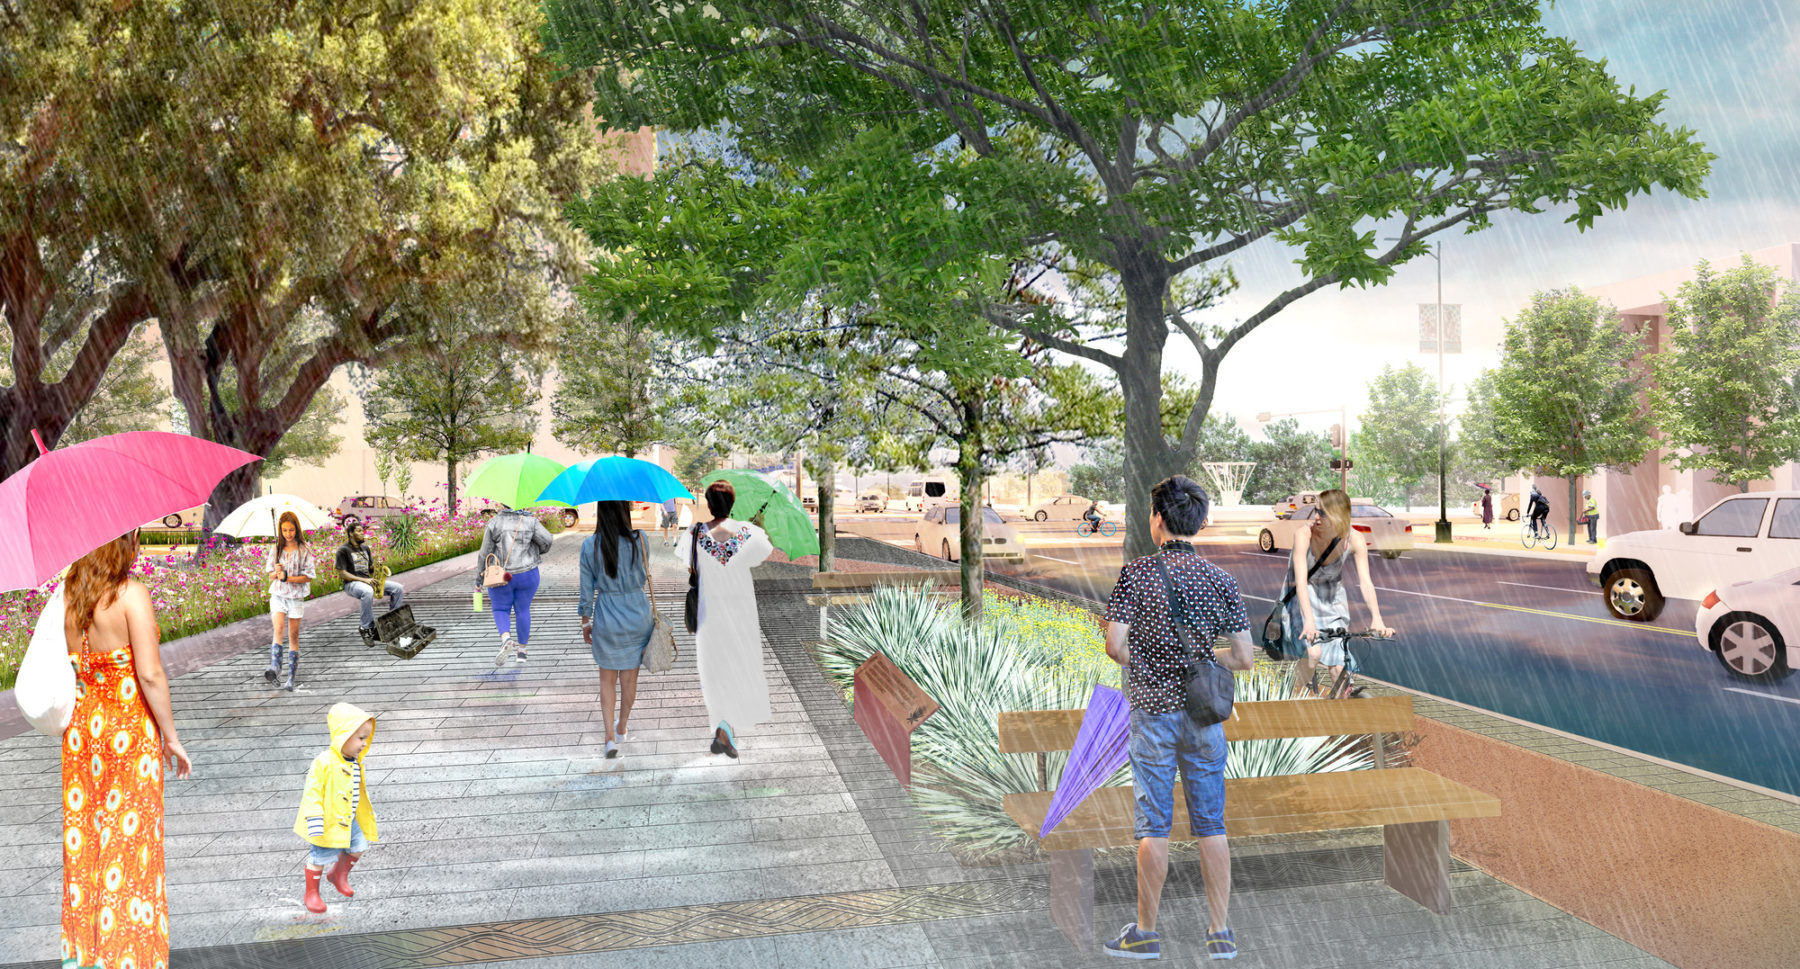 Rendering of proposed street design during a rainstorm. In the foreground a woman in an orange jumpsuit and red umbrella looks at a child in a yellow rain jacket playing in the rain. A woman rides a bike in the designated lane on the right side.